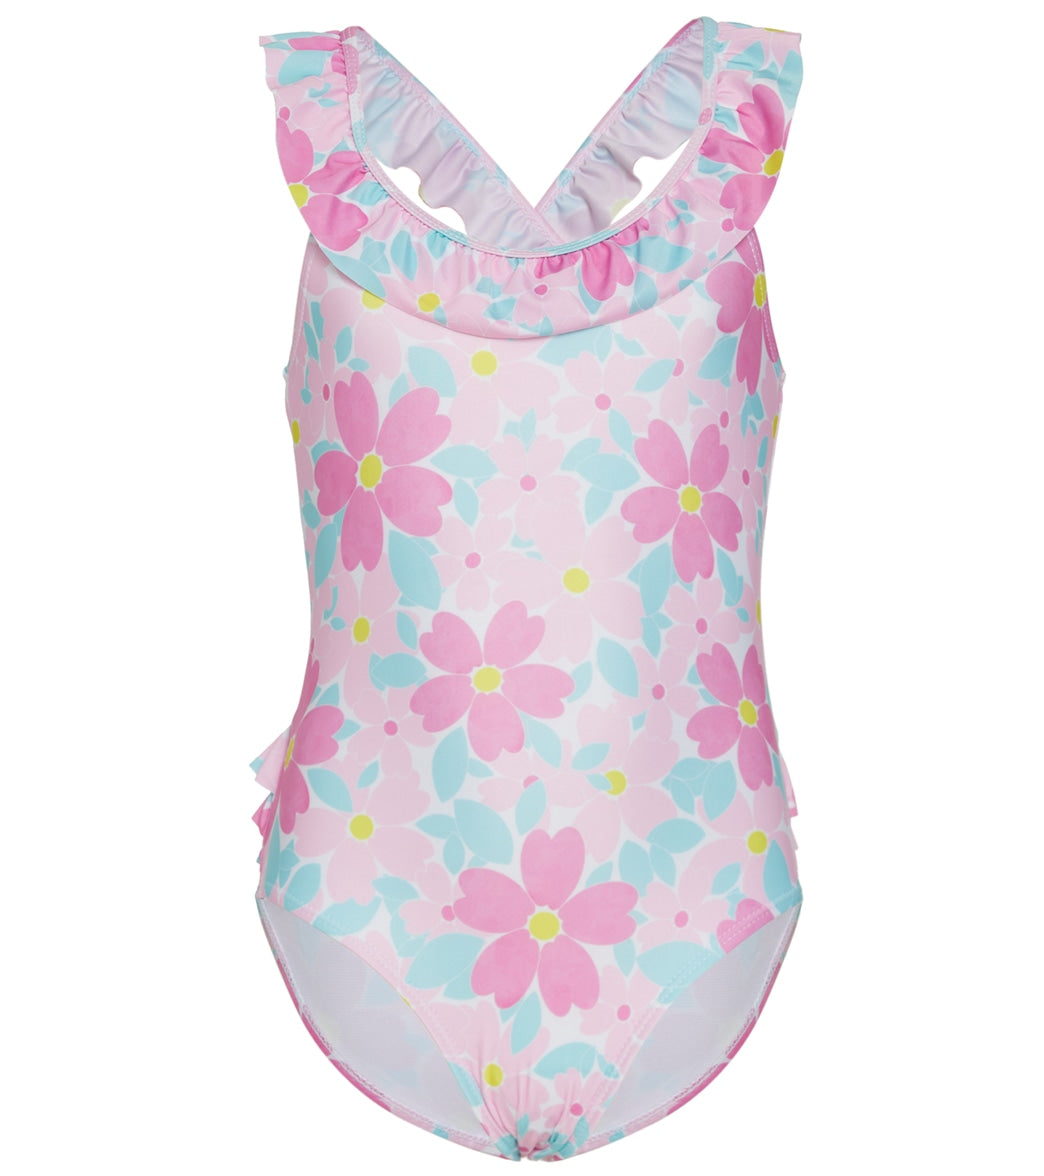 Flap Happy Girls Painted Flowers Mindy UPF 50+ One Piece Swimsuit (Baby, Toddler, Little Kid)